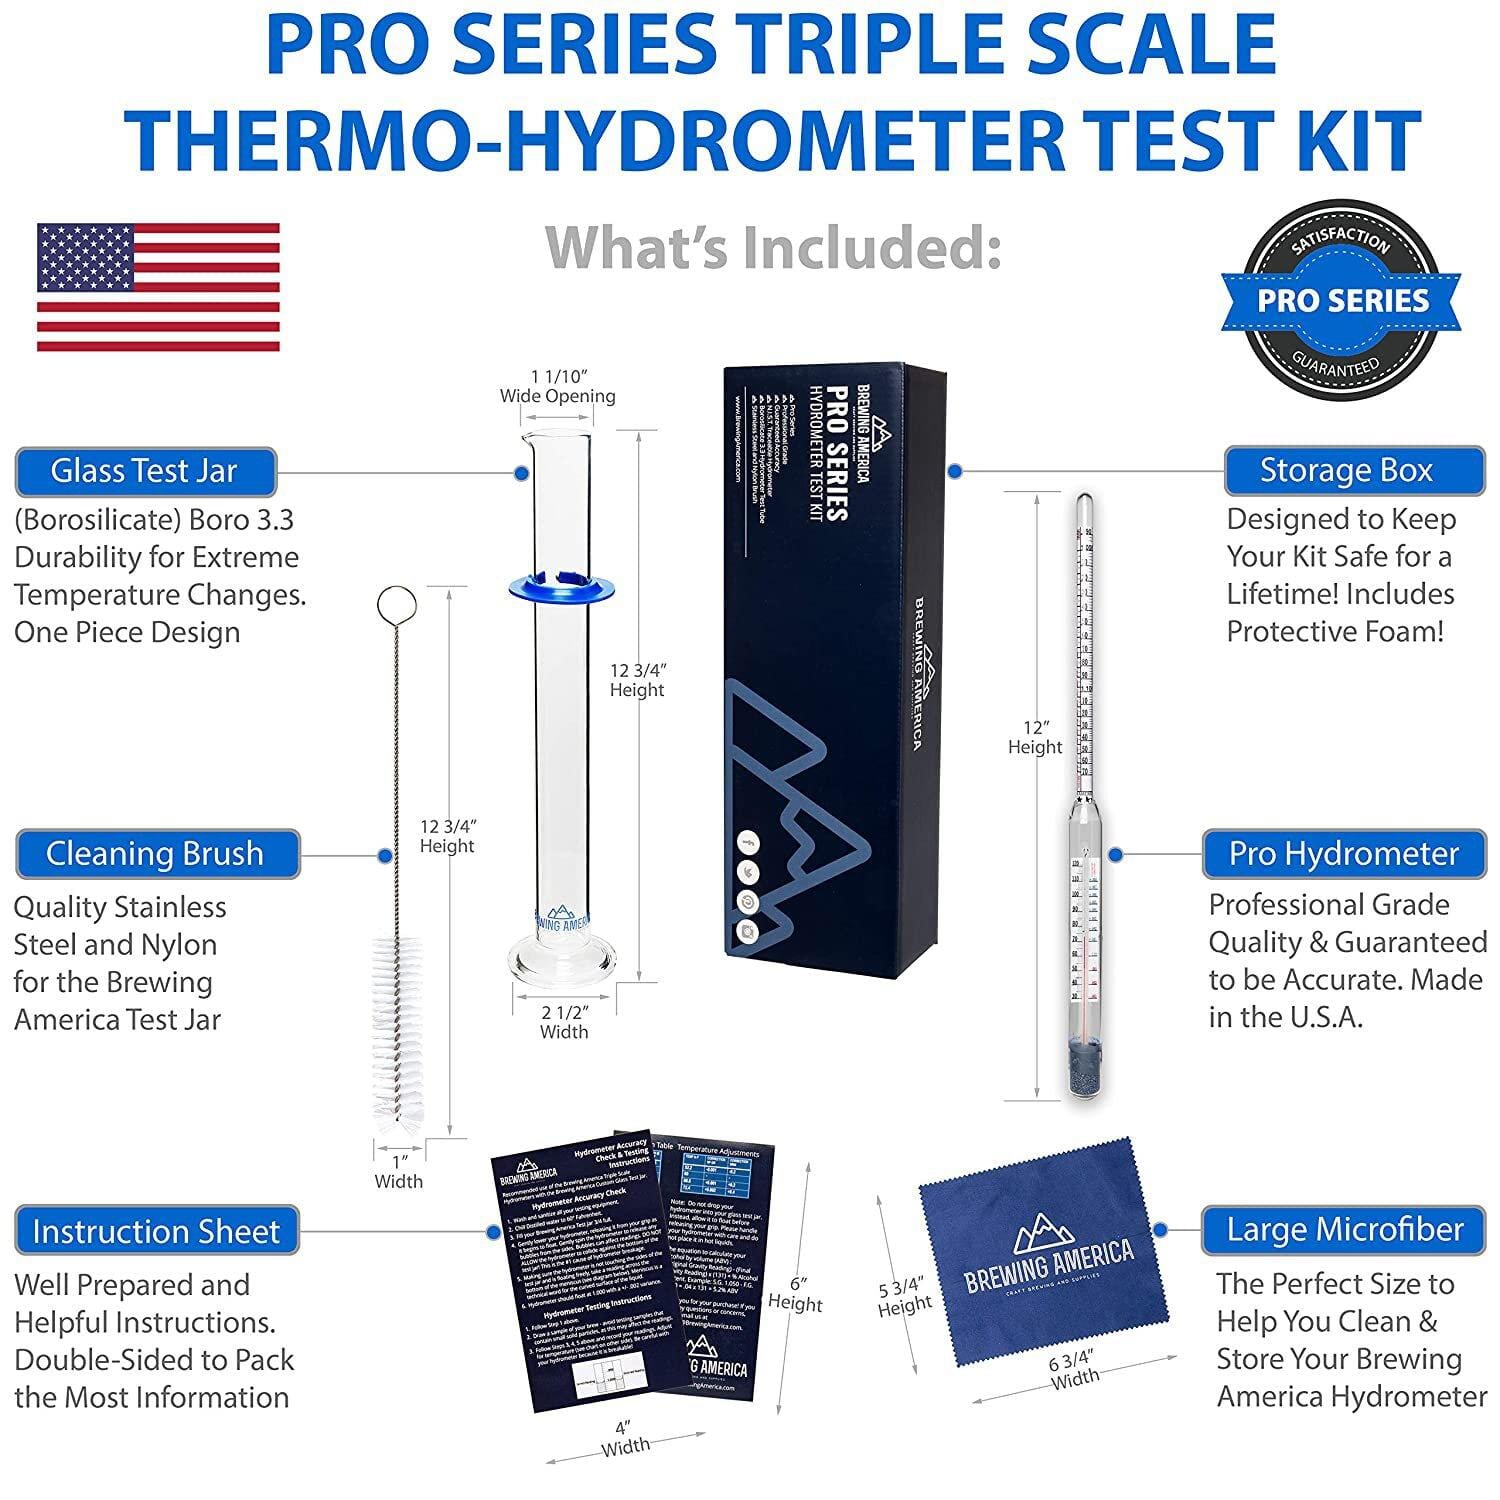 Thermo-Hydrometer ABV Tester Triple Scale American-made Specific Gravity Hydrometer Thermometer KIT American Hydrometer Test Kits Brewing America 